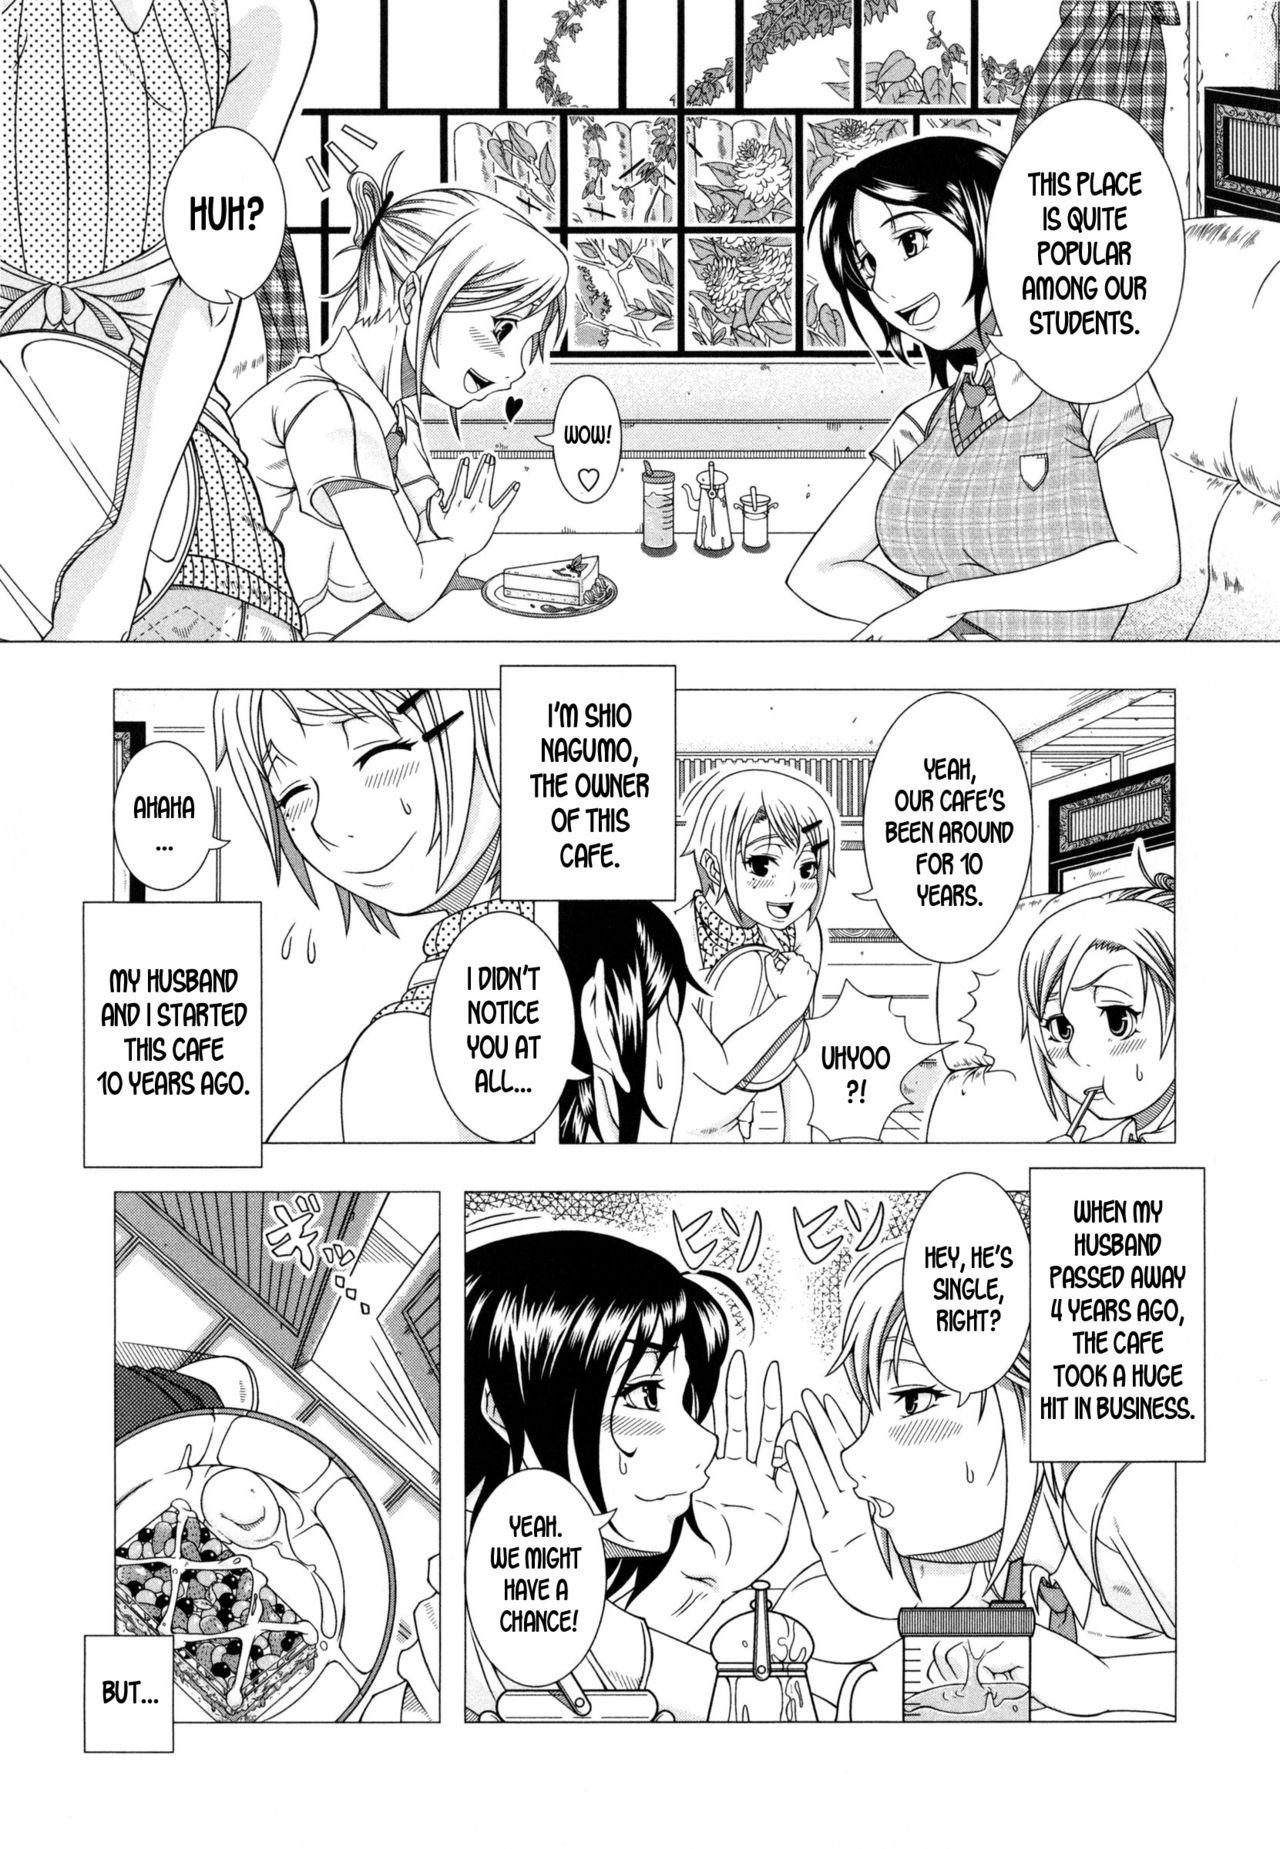 Mas Futari no Jikan | Our Time Together Yanks Featured - Page 3